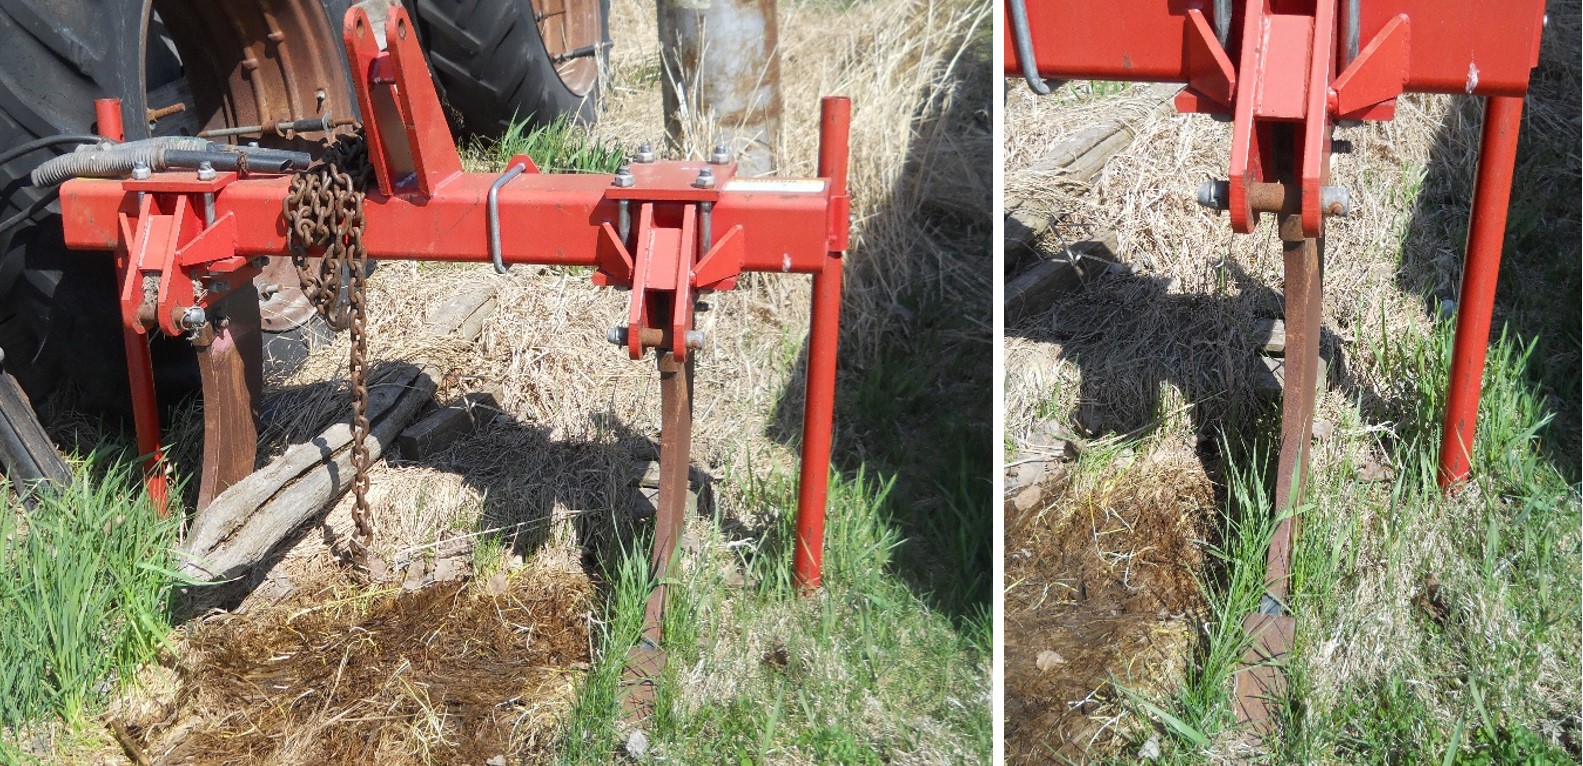 Two pictures showing tillage equipment in the ground.